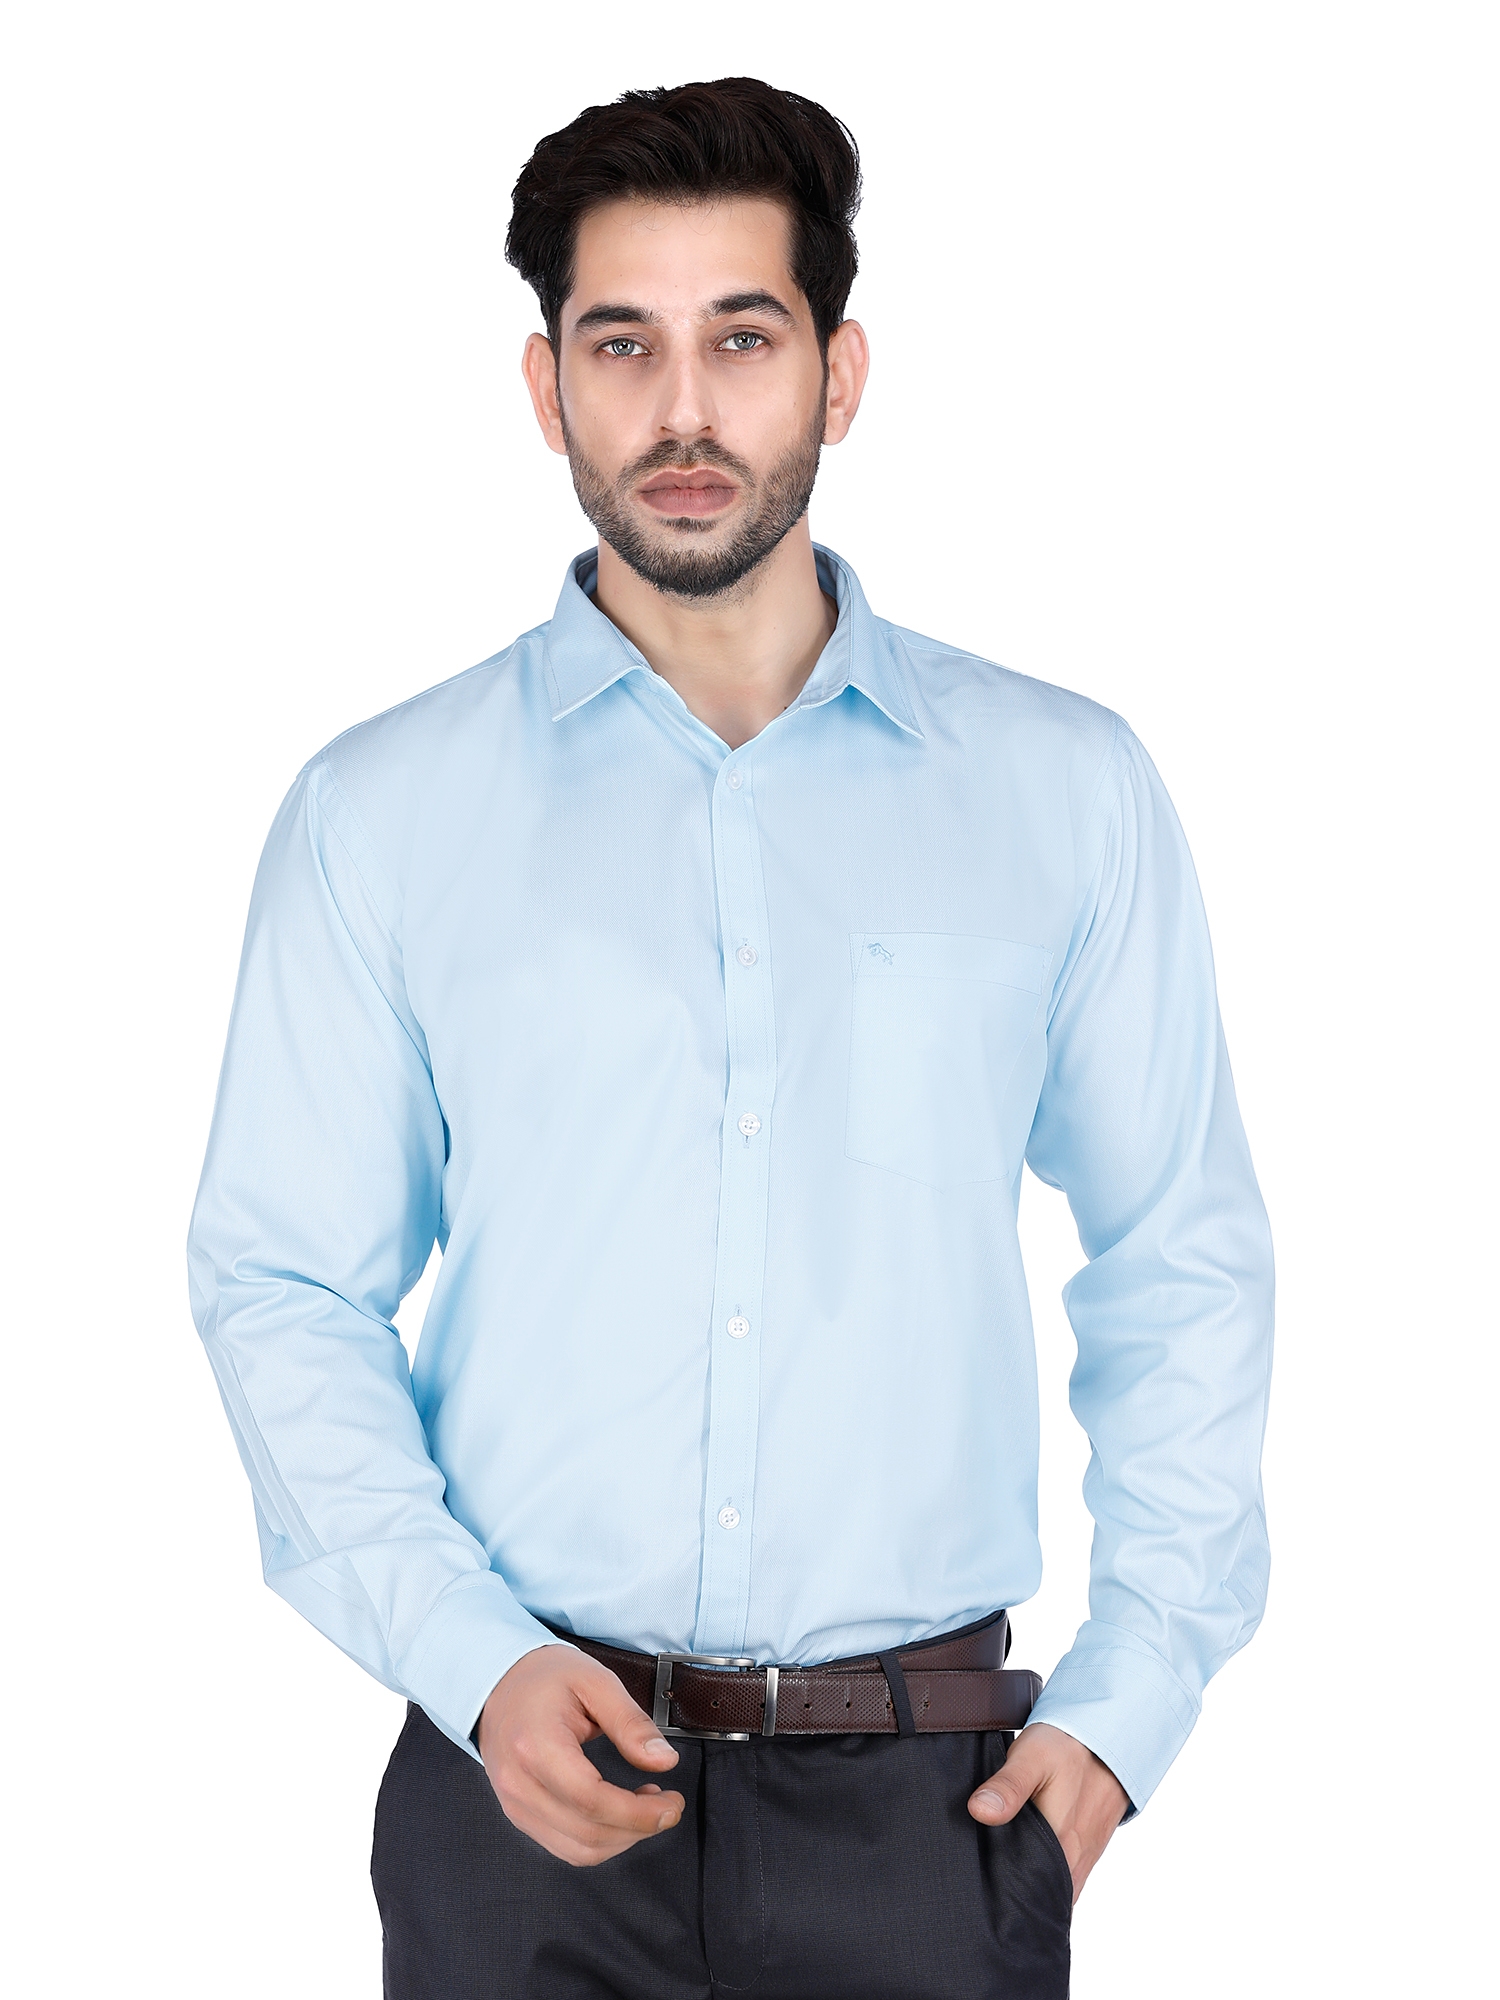 D'cot by Donear Men Blue Polycotton Slim Solid Formal Shirts